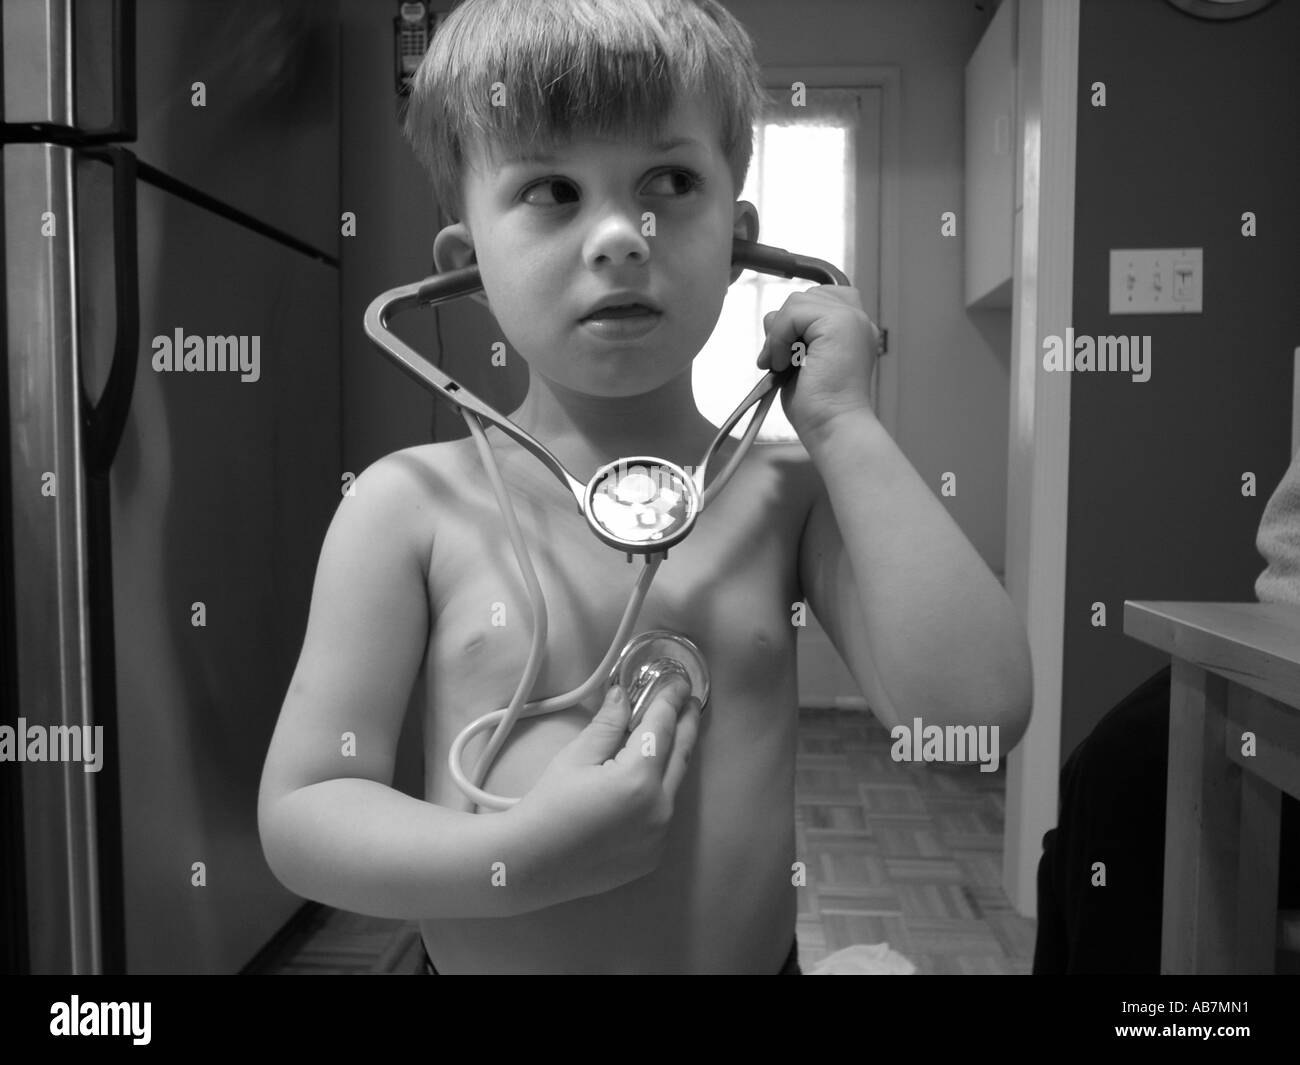 Photo of a Small Child playing with a toy Stethoscope listening to his own heart beat Stock Photo